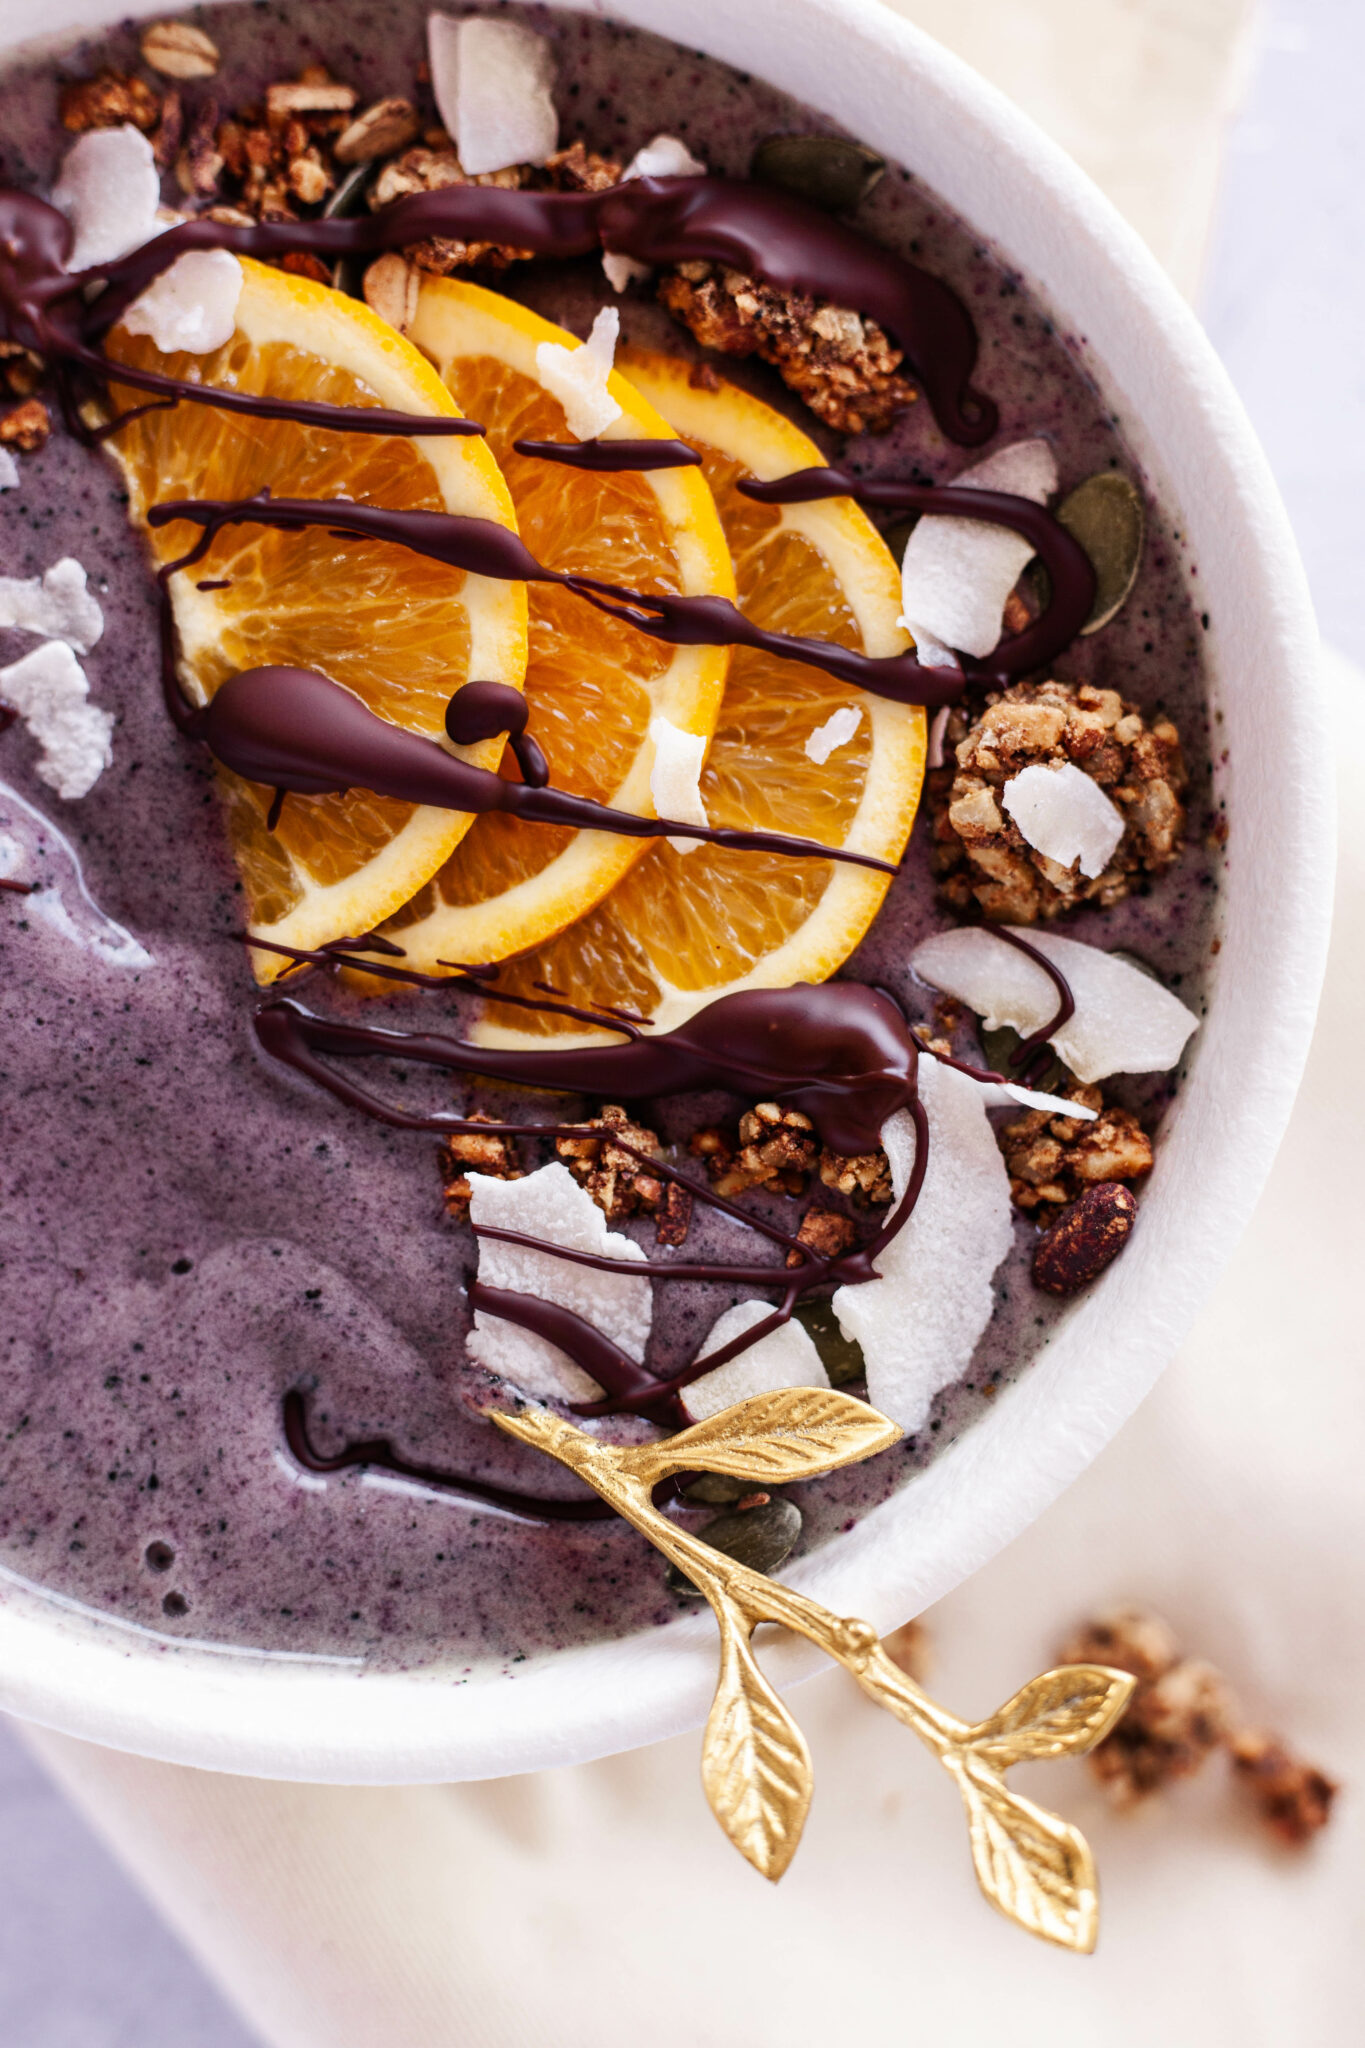 Purple smoothie bowl with chocolate drizzle and sliced oranges